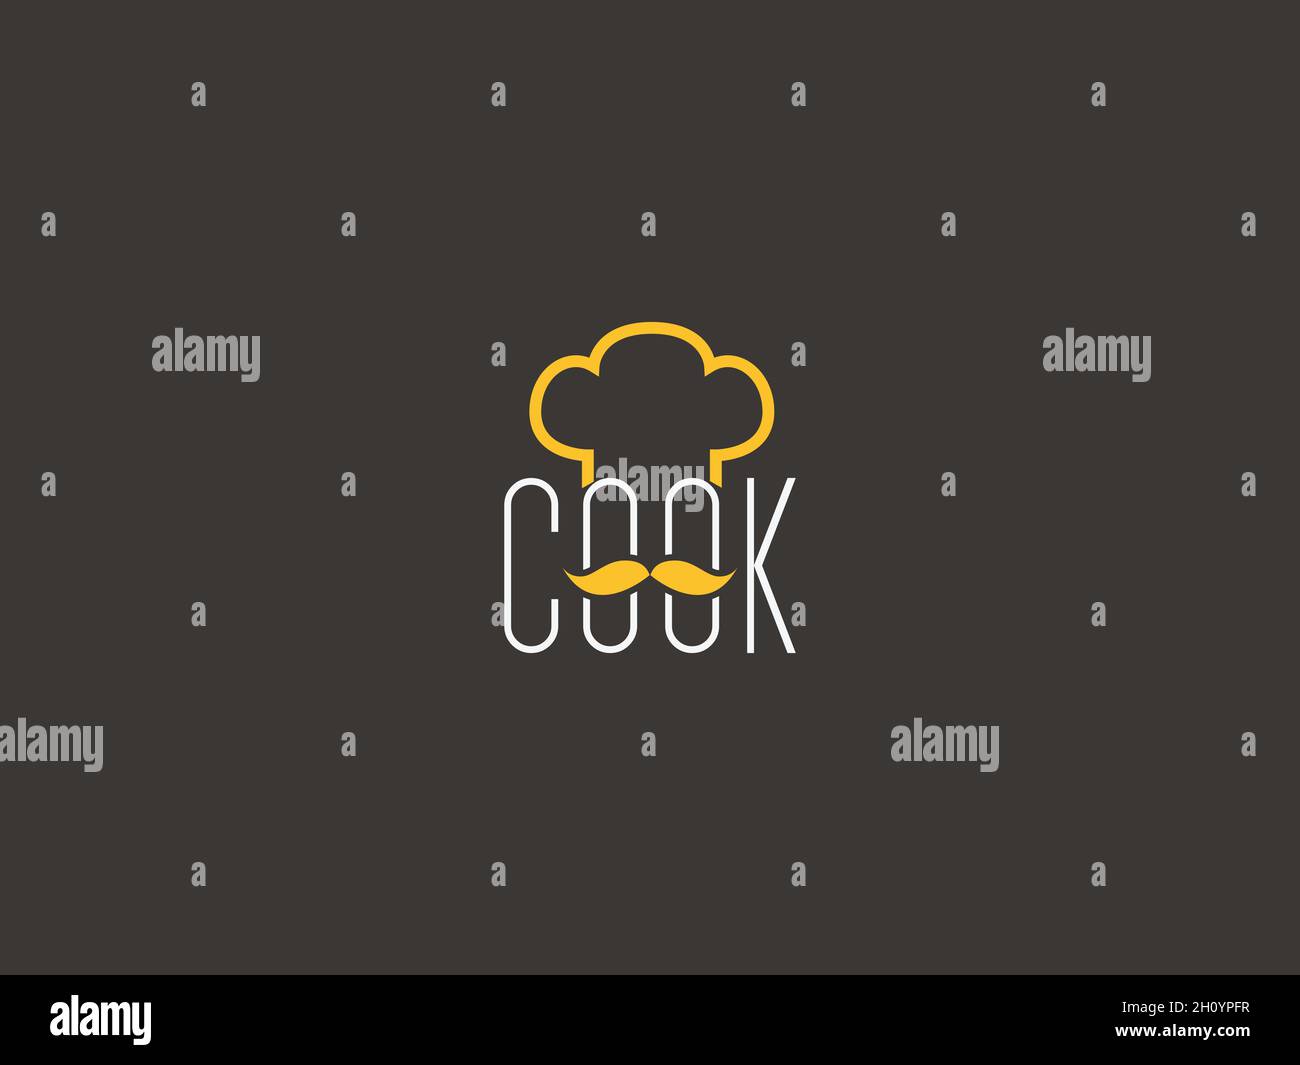 LETTER COOK LOGO WITH MUSTACHE ICON FOR ILLUSTRATION USE Stock Vector